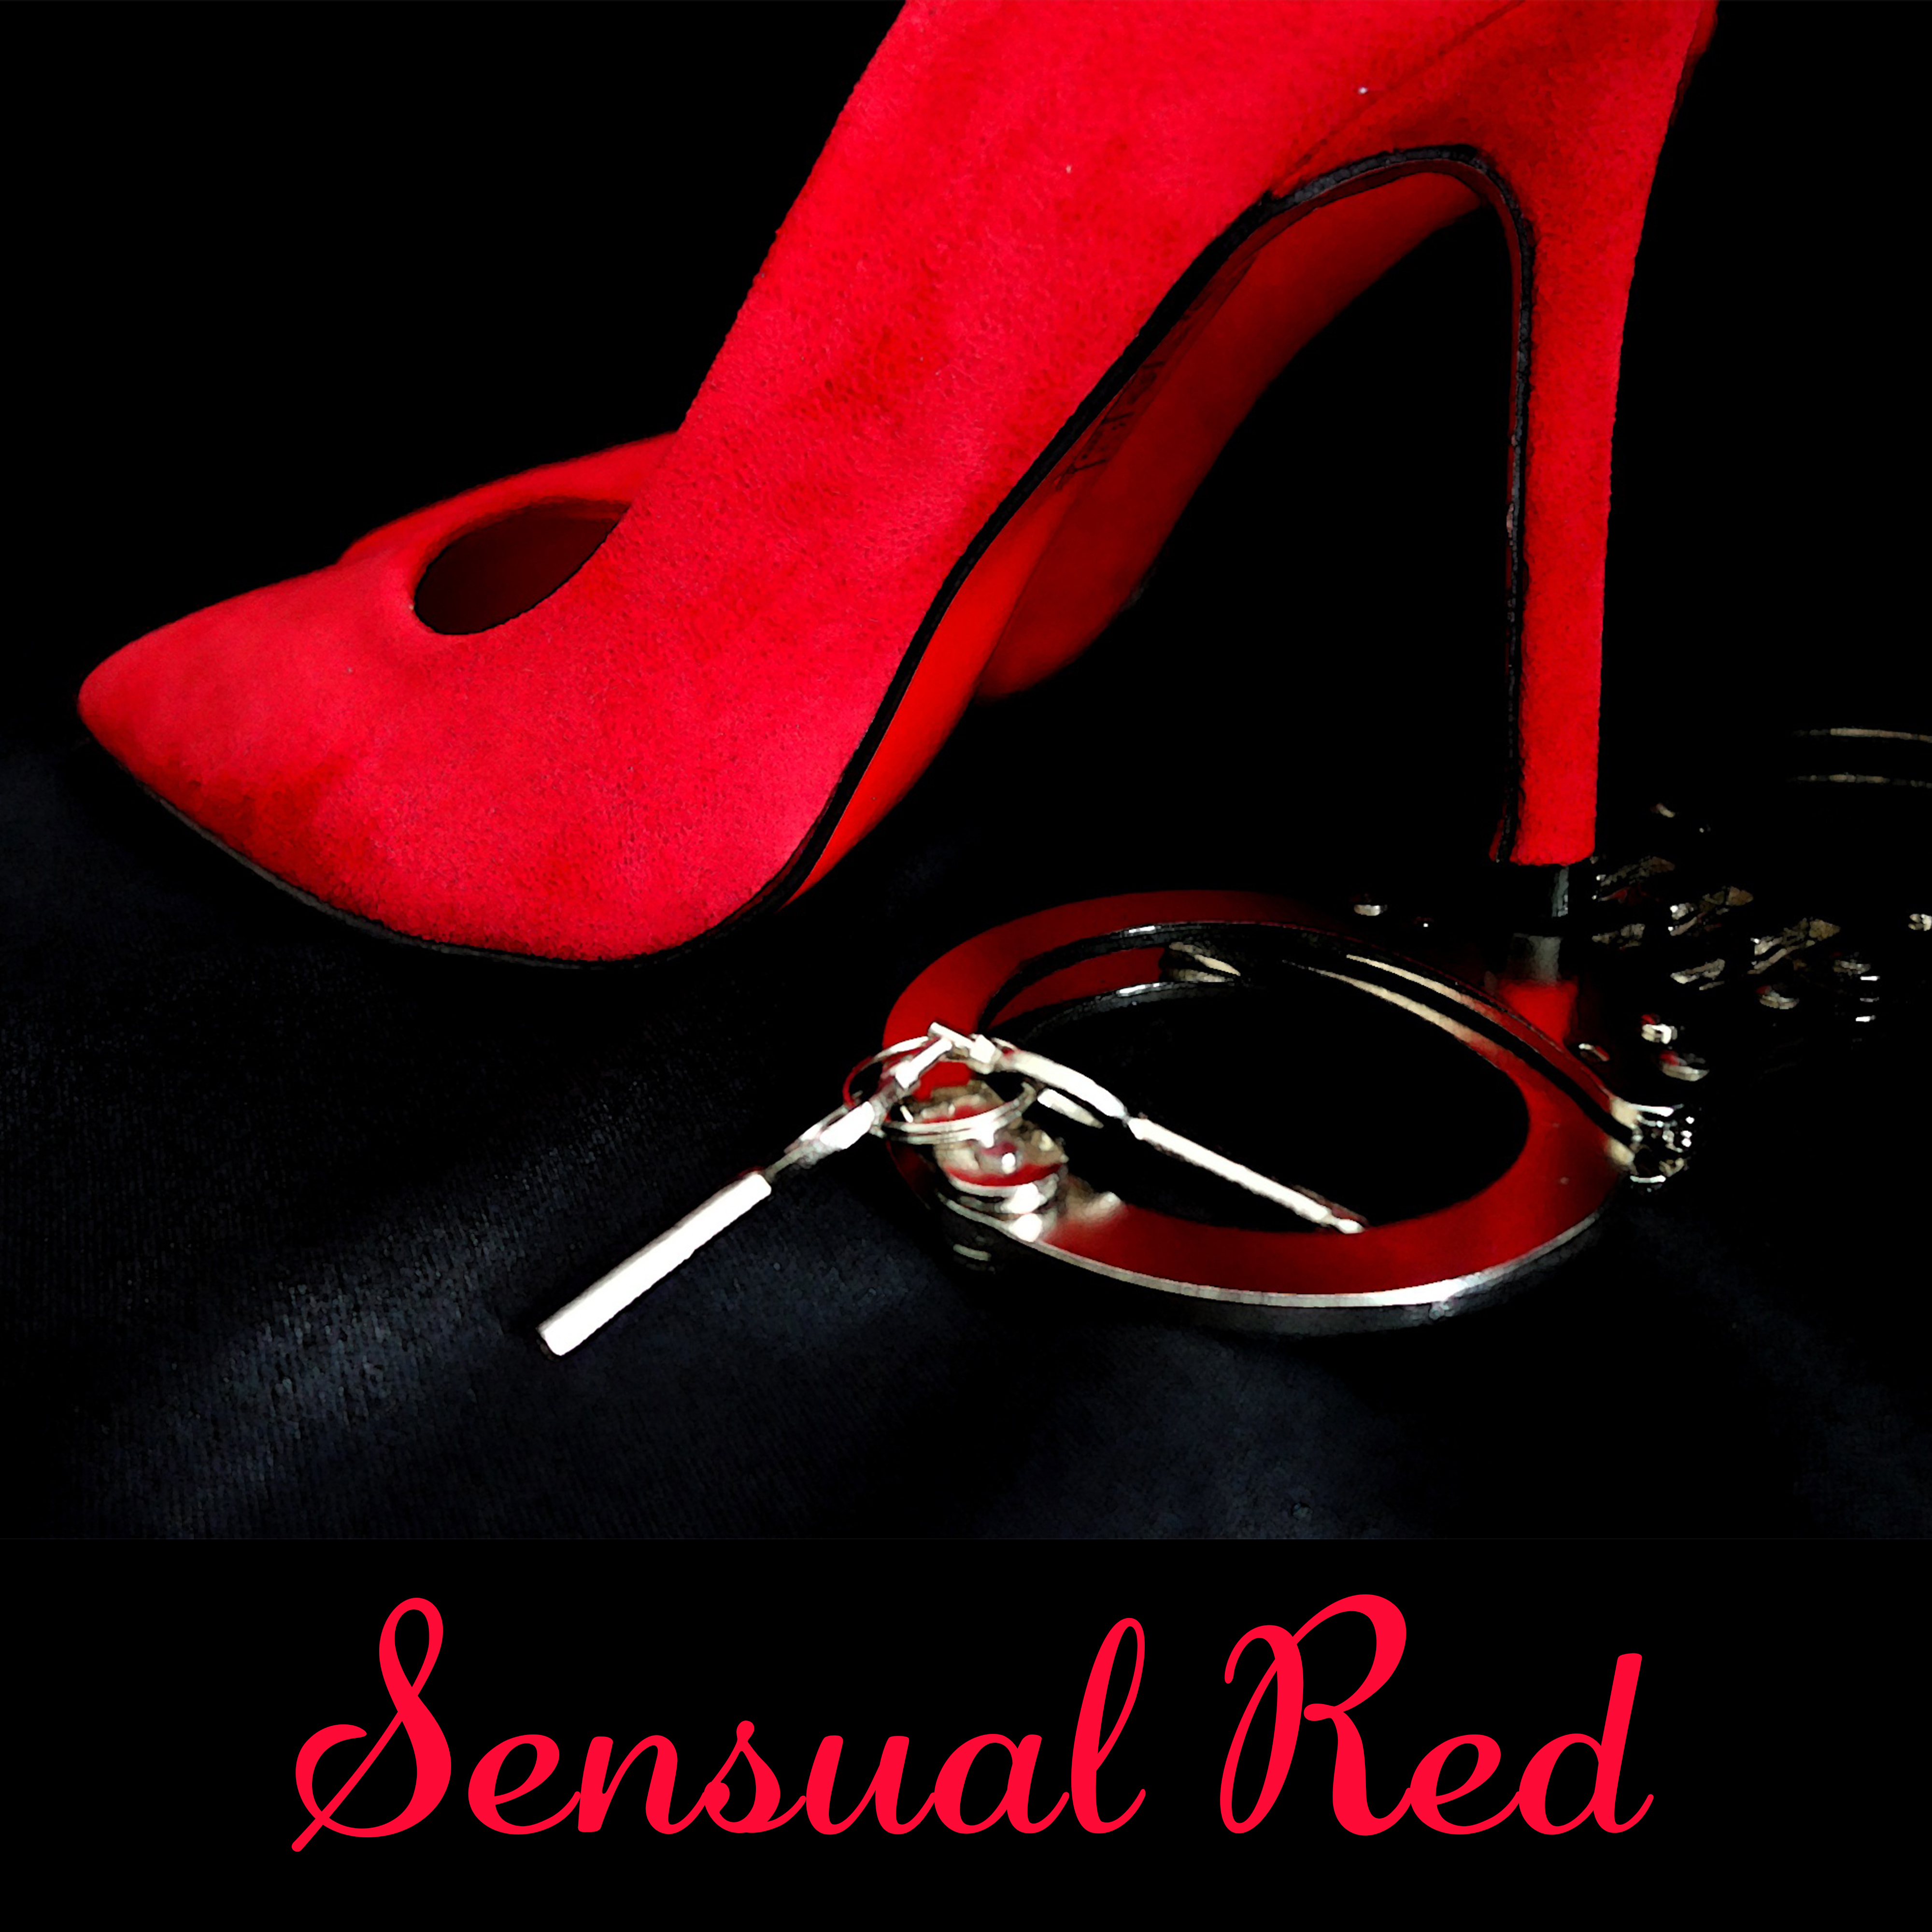 Sensual Red – **** Jazz, Romantic Evening, Piano Solo, Red Wine, Candlelight, Lovely Time, Smooth Jazz for Lovers